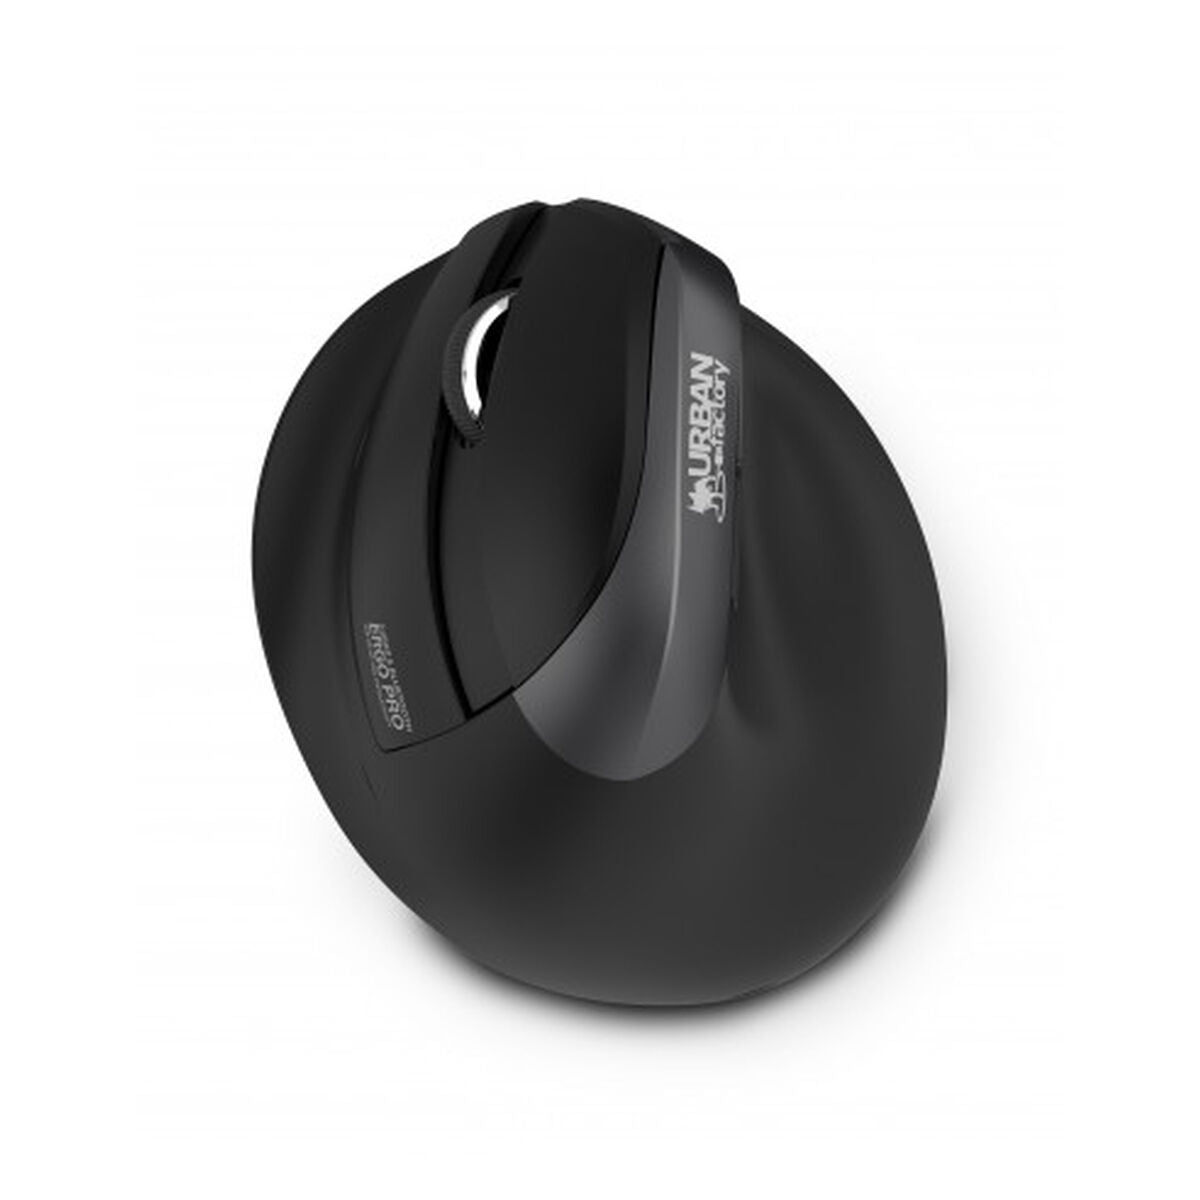 Ergonomic Optical Mouse Urban Factory EPL20UF 4000 dpi, Urban Factory, Computing, Accessories, ergonomic-optical-mouse-urban-factory-epl20uf-4000-dpi, Brand_Urban Factory, category-reference-2609, category-reference-2642, category-reference-2656, category-reference-t-19685, category-reference-t-19908, category-reference-t-21353, computers / peripherals, Condition_NEW, office, Price_50 - 100, RiotNook